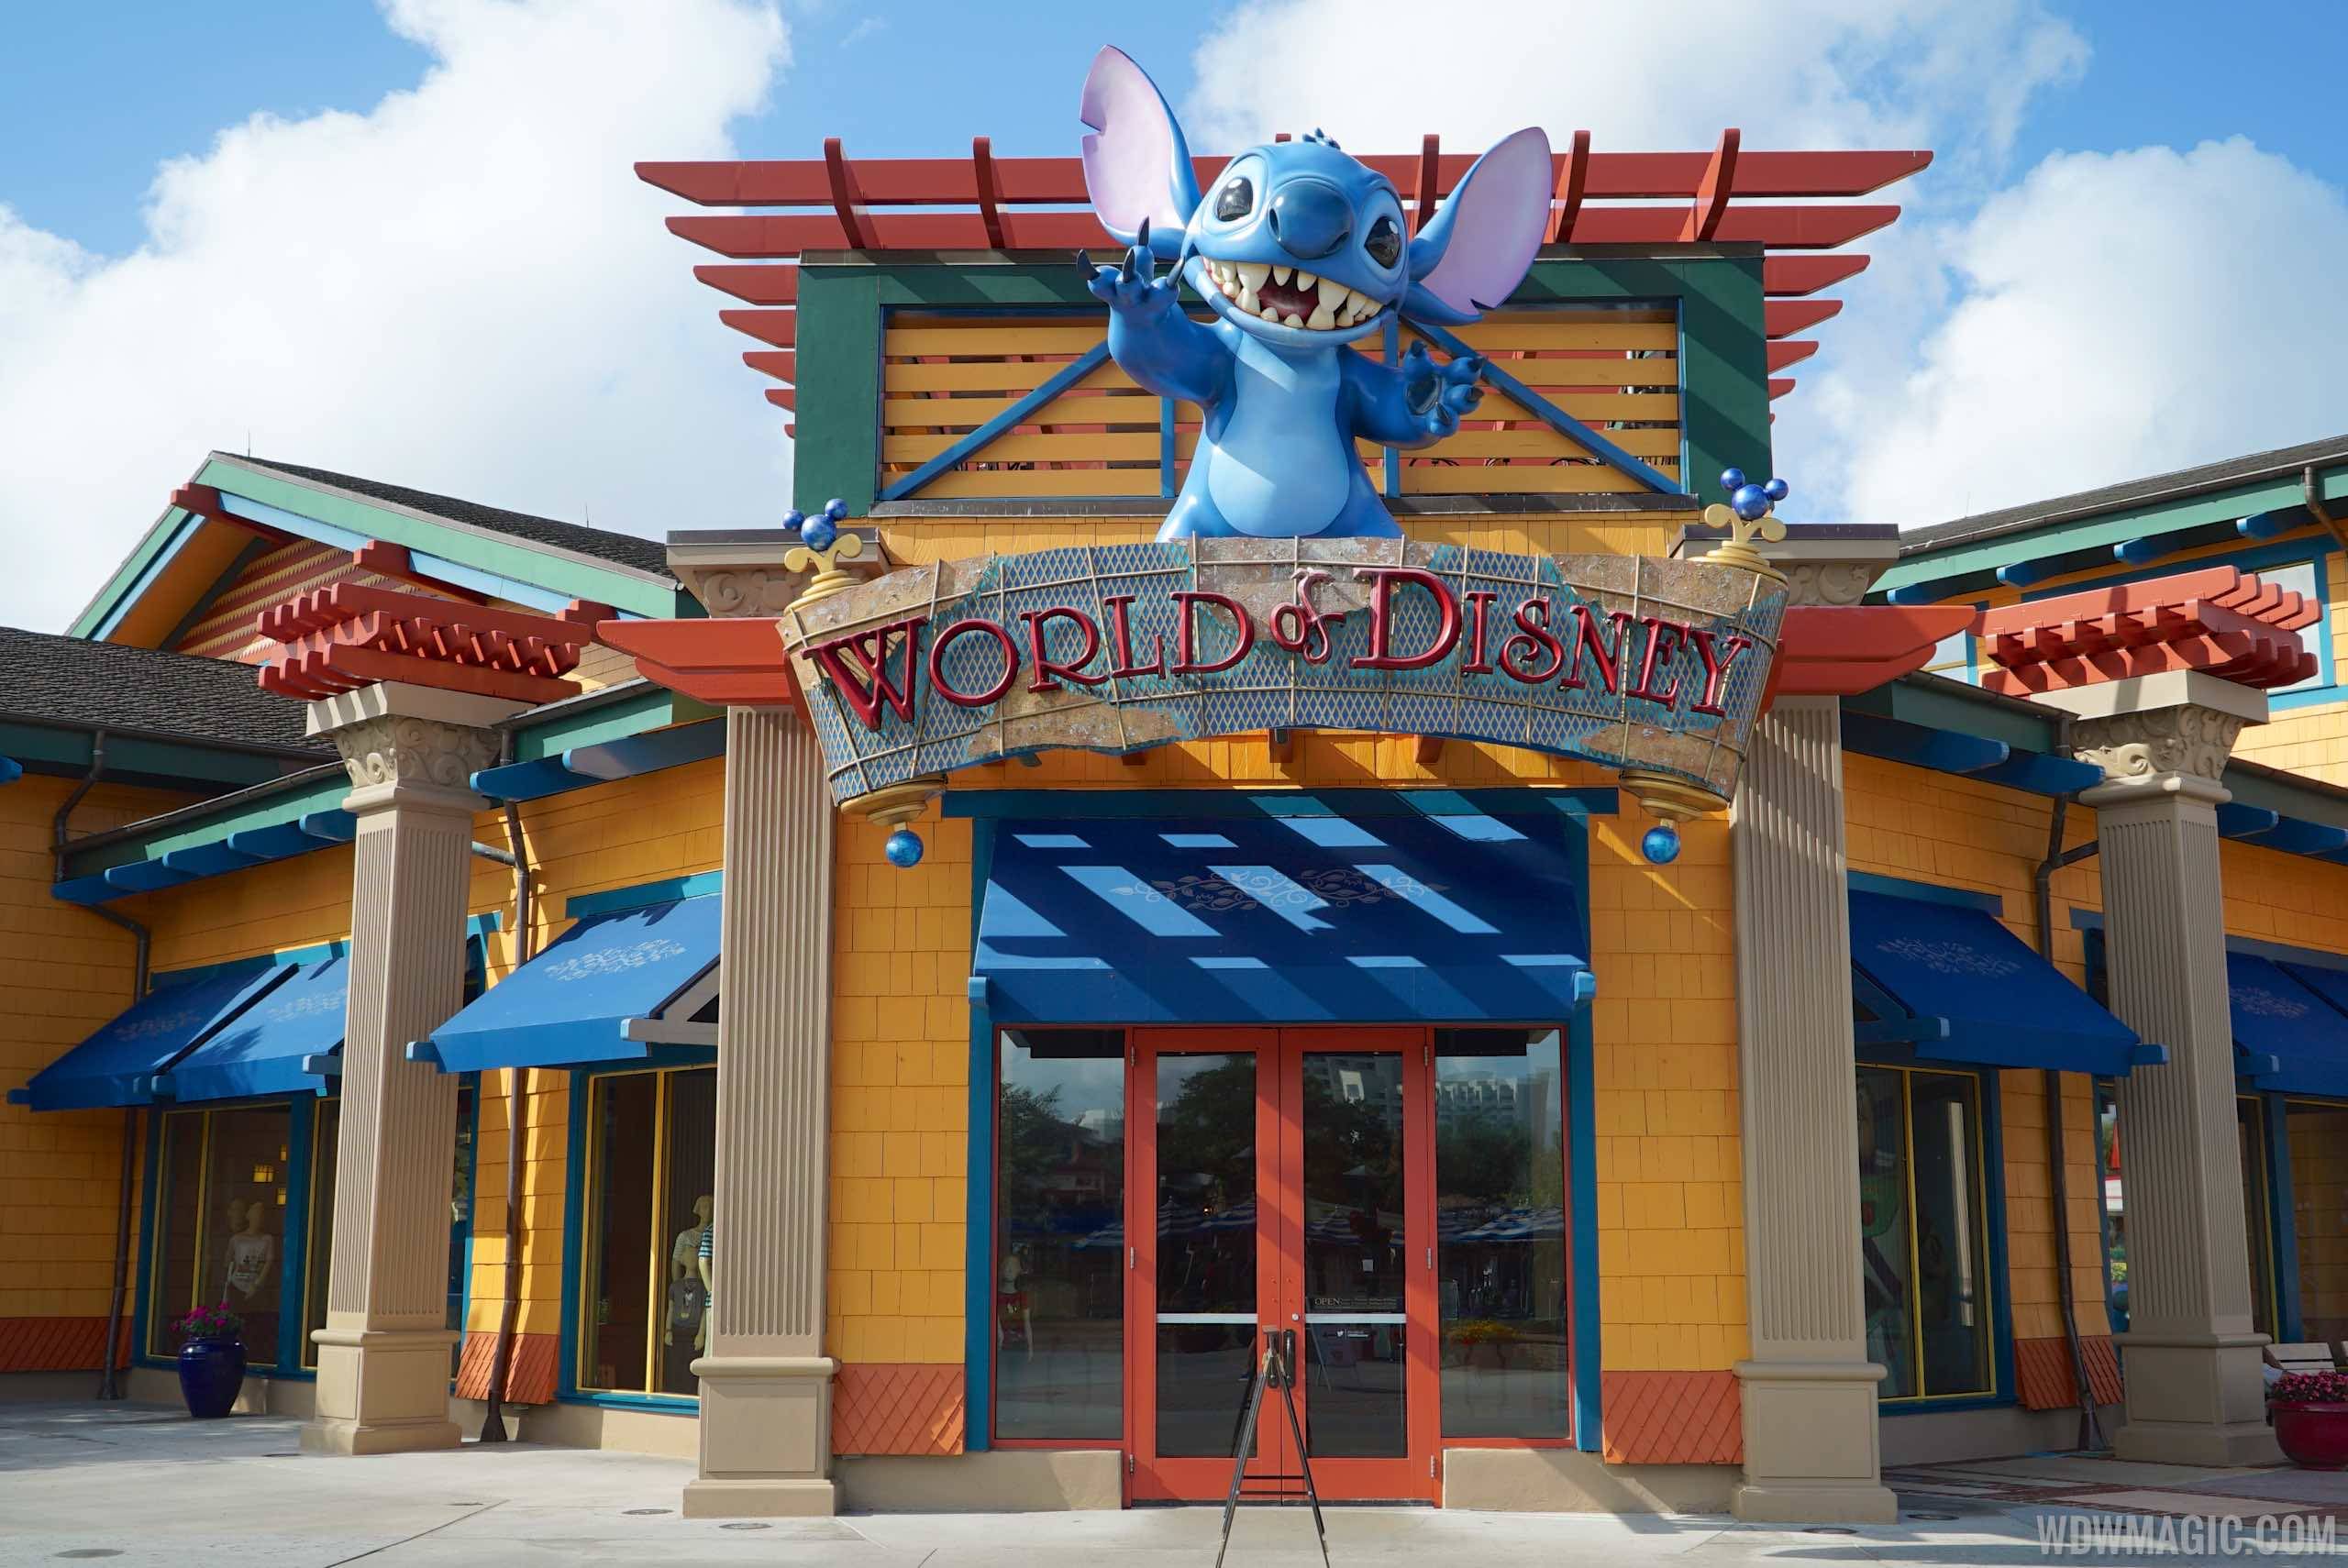 Deep discounts for passholders this Saturday at Downtown Disney's World of Disney